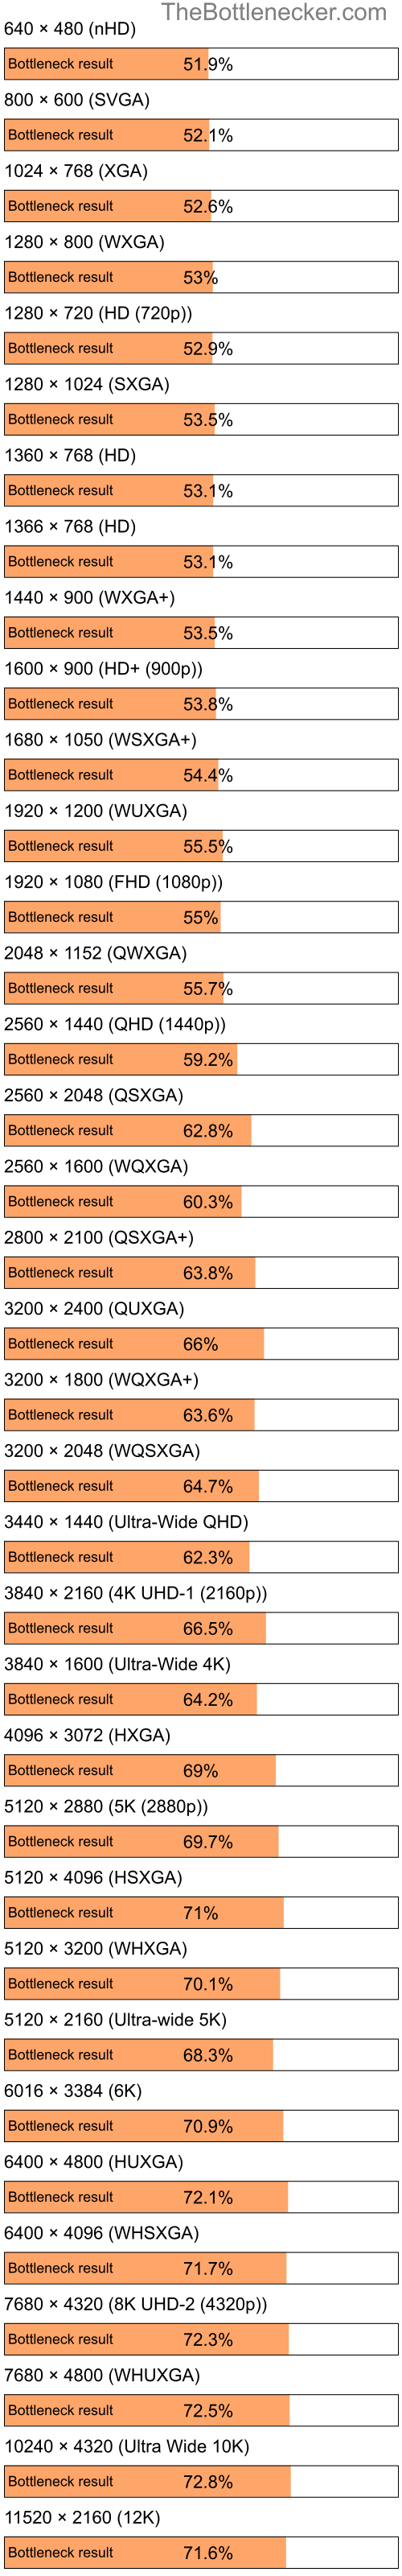 Bottleneck results by resolution for Intel Atom Z520 and AMD Mobility Radeon HD 2400 XT in Processor Intense Tasks